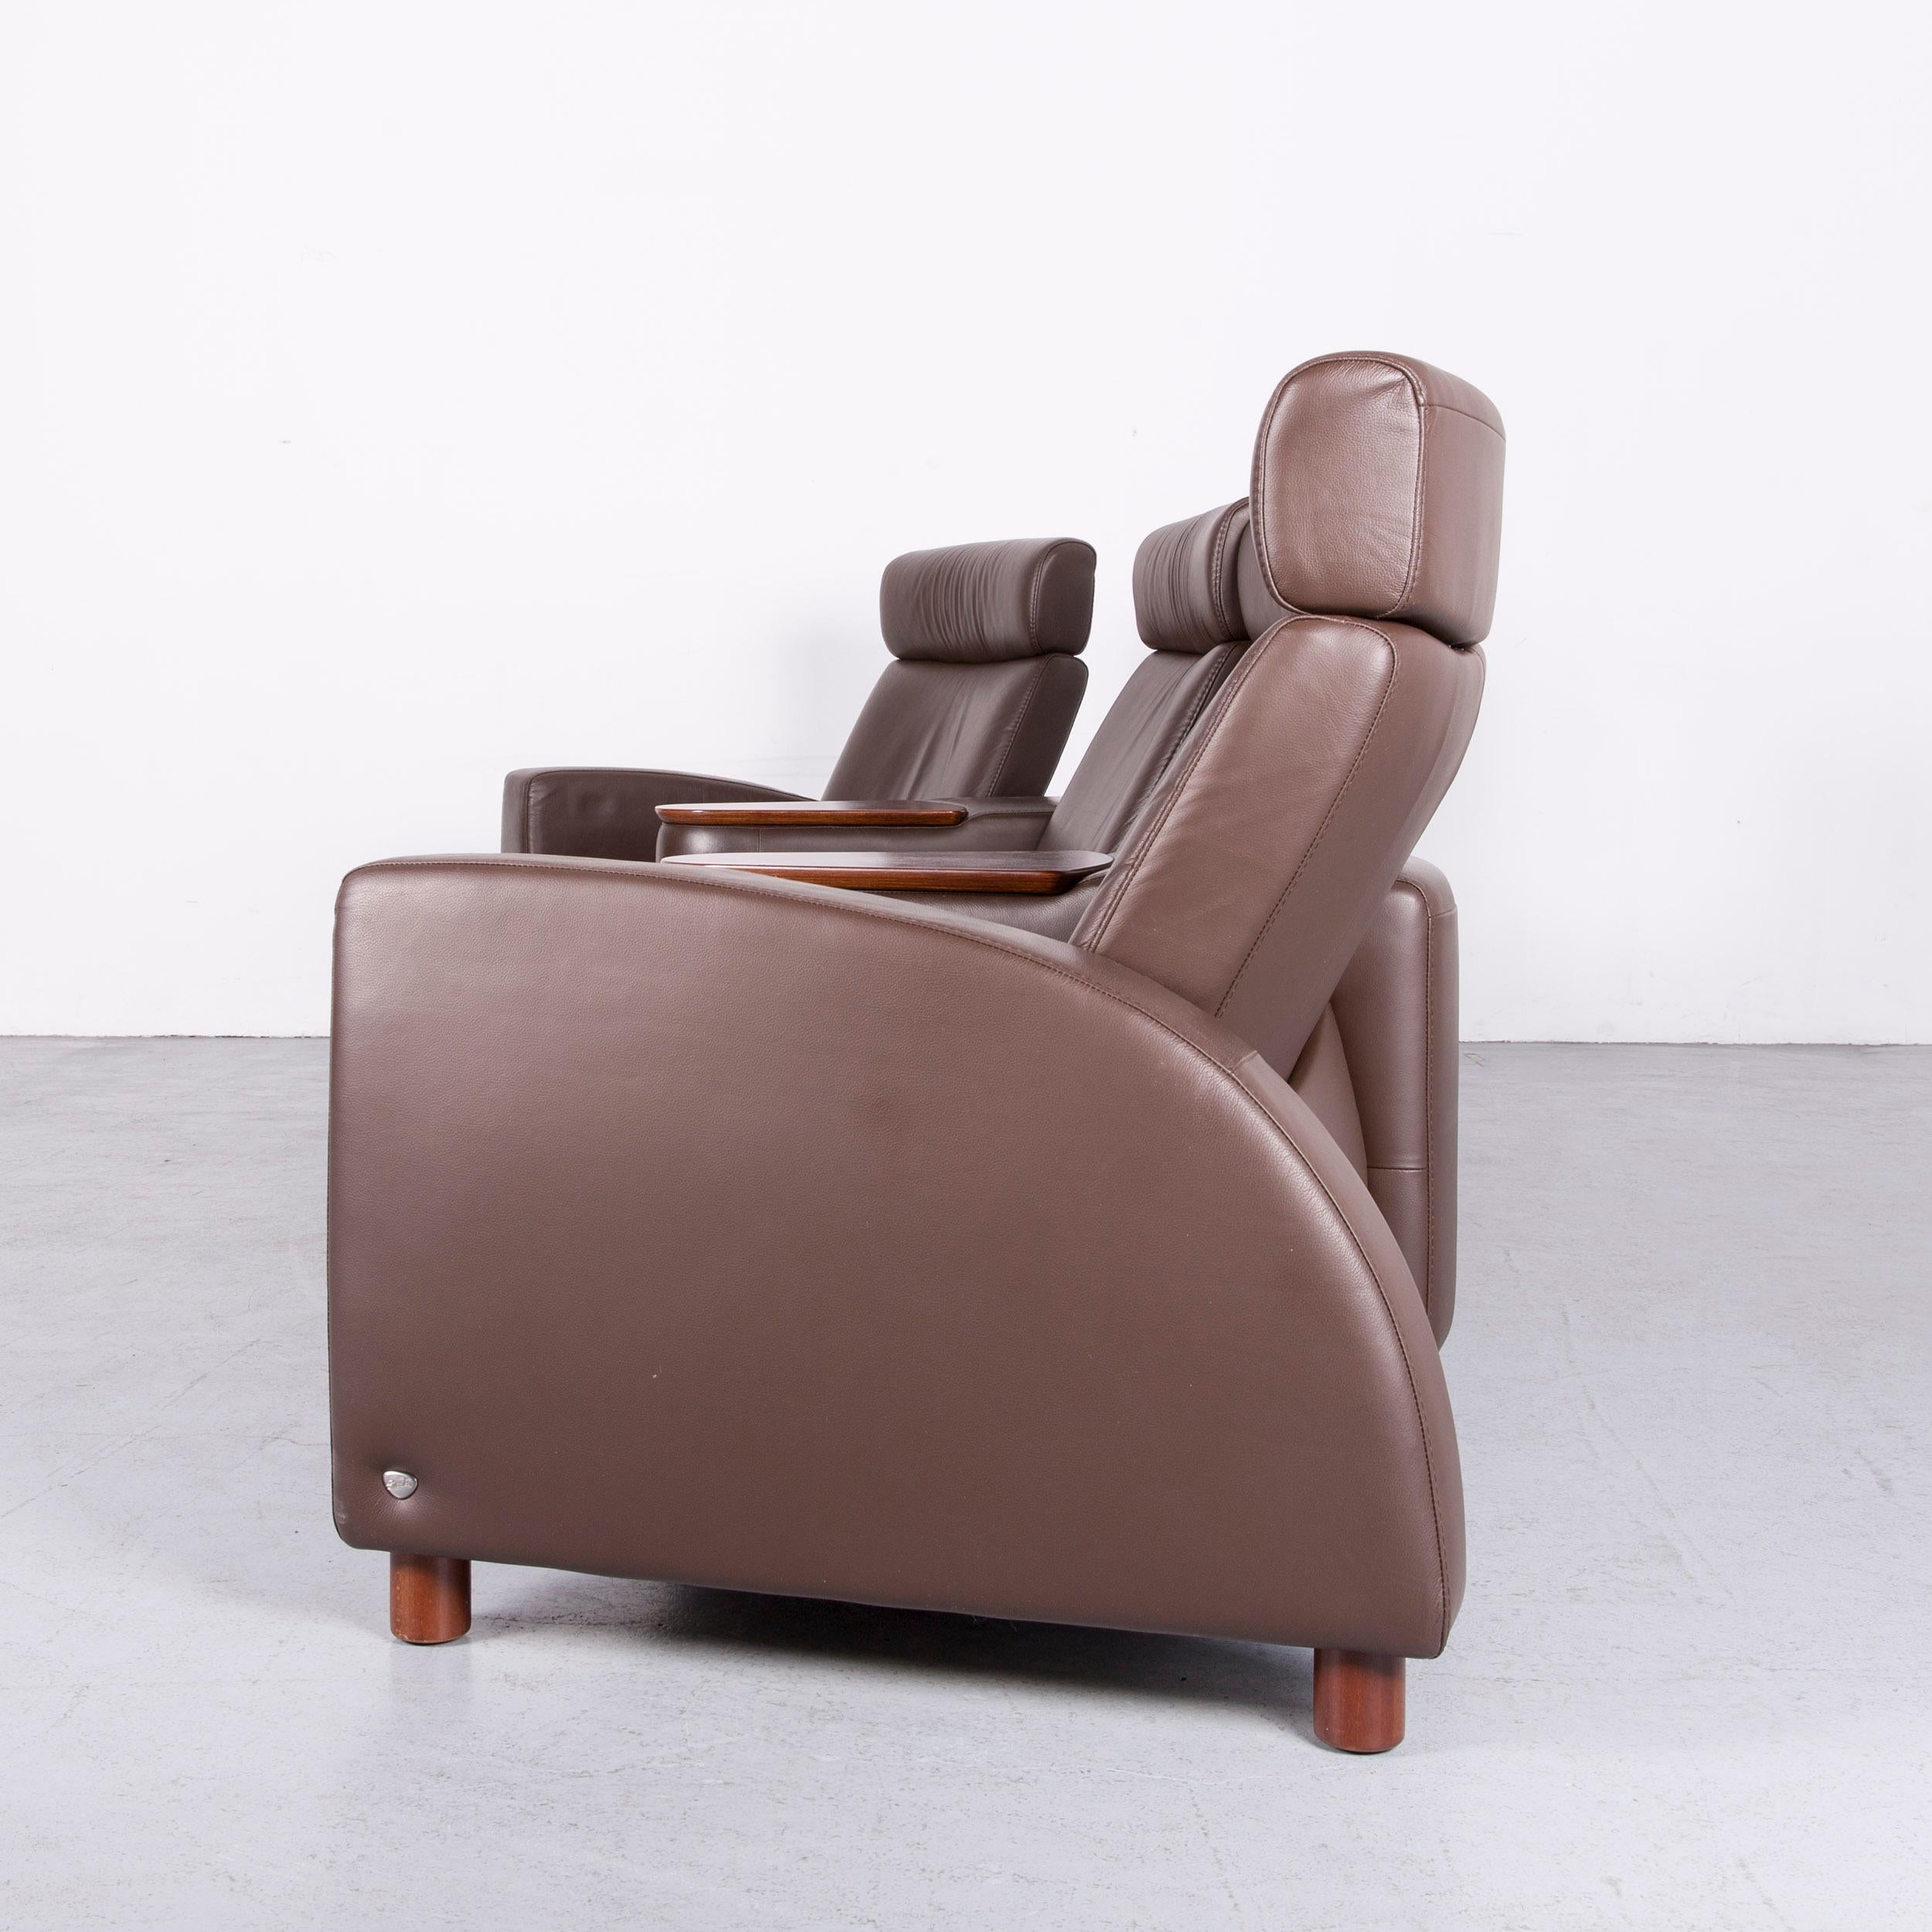 Ekornes Stressless Arion Sofa Brown Leather Four-Seat Couch with Function 8